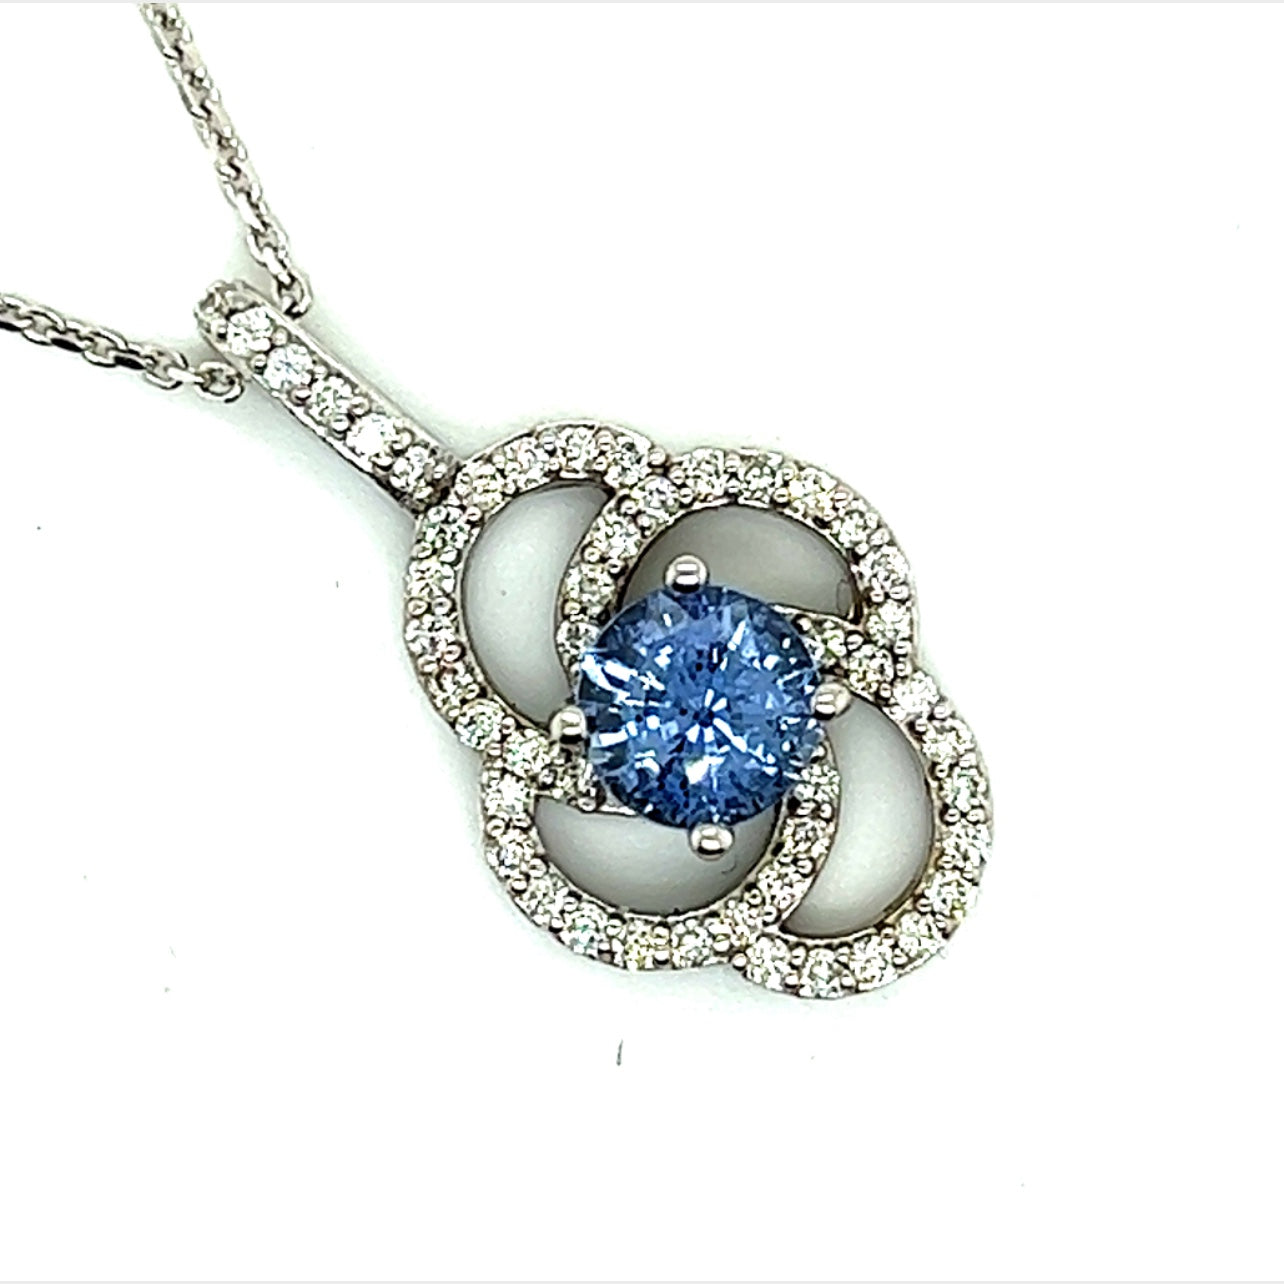 Natural Sapphire Diamond Pendant With Chain 17.5" 14k W Gold 2.17 TCW Certified $4,975 216663 - Certified Fine Jewelry